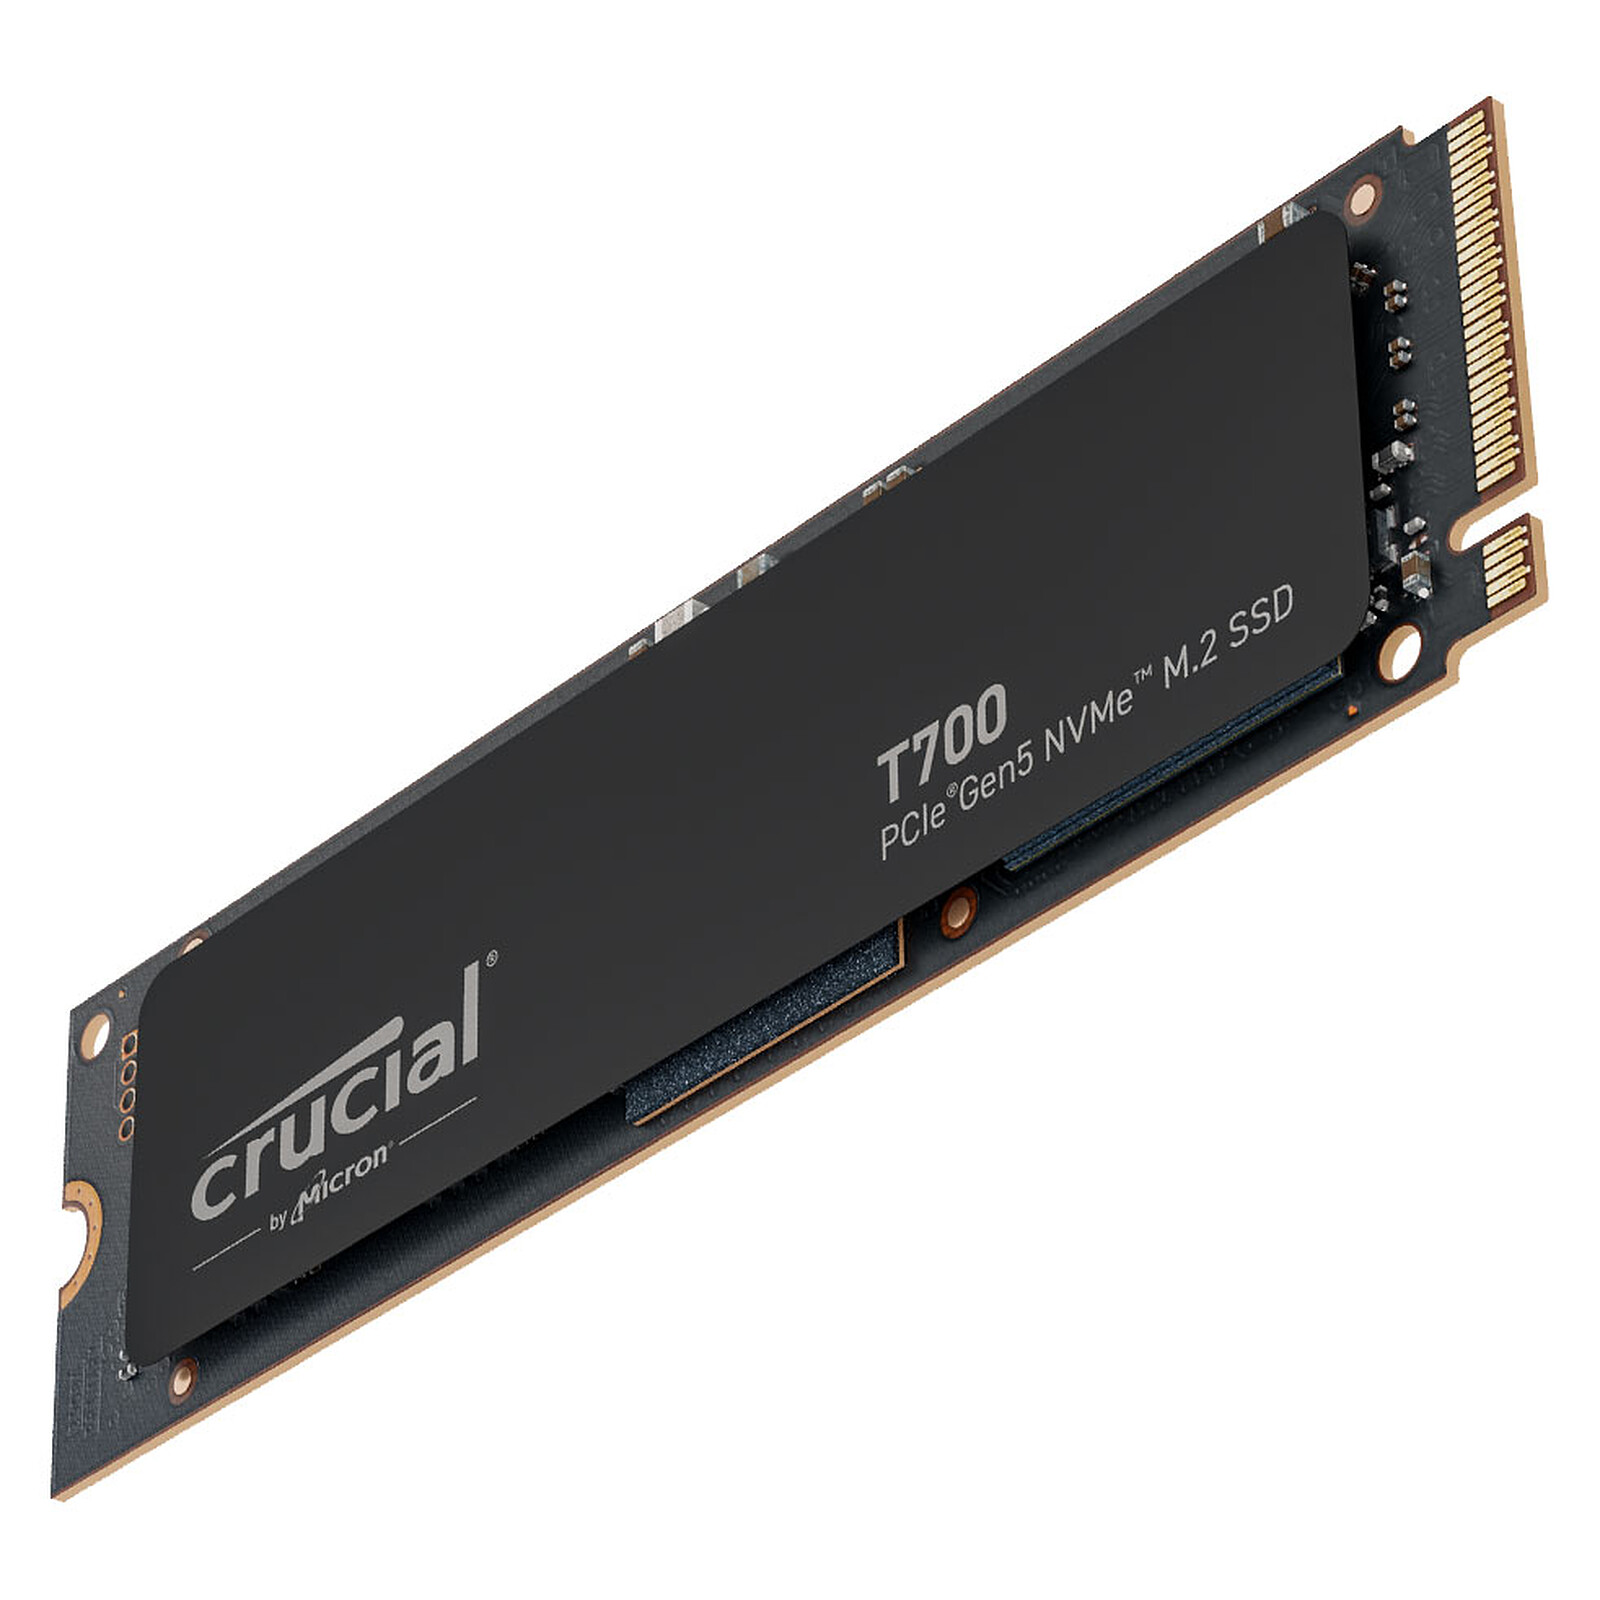 Crucial P5 M.2 PCIe NVMe 2TB - SSD - LDLC 3-year warranty